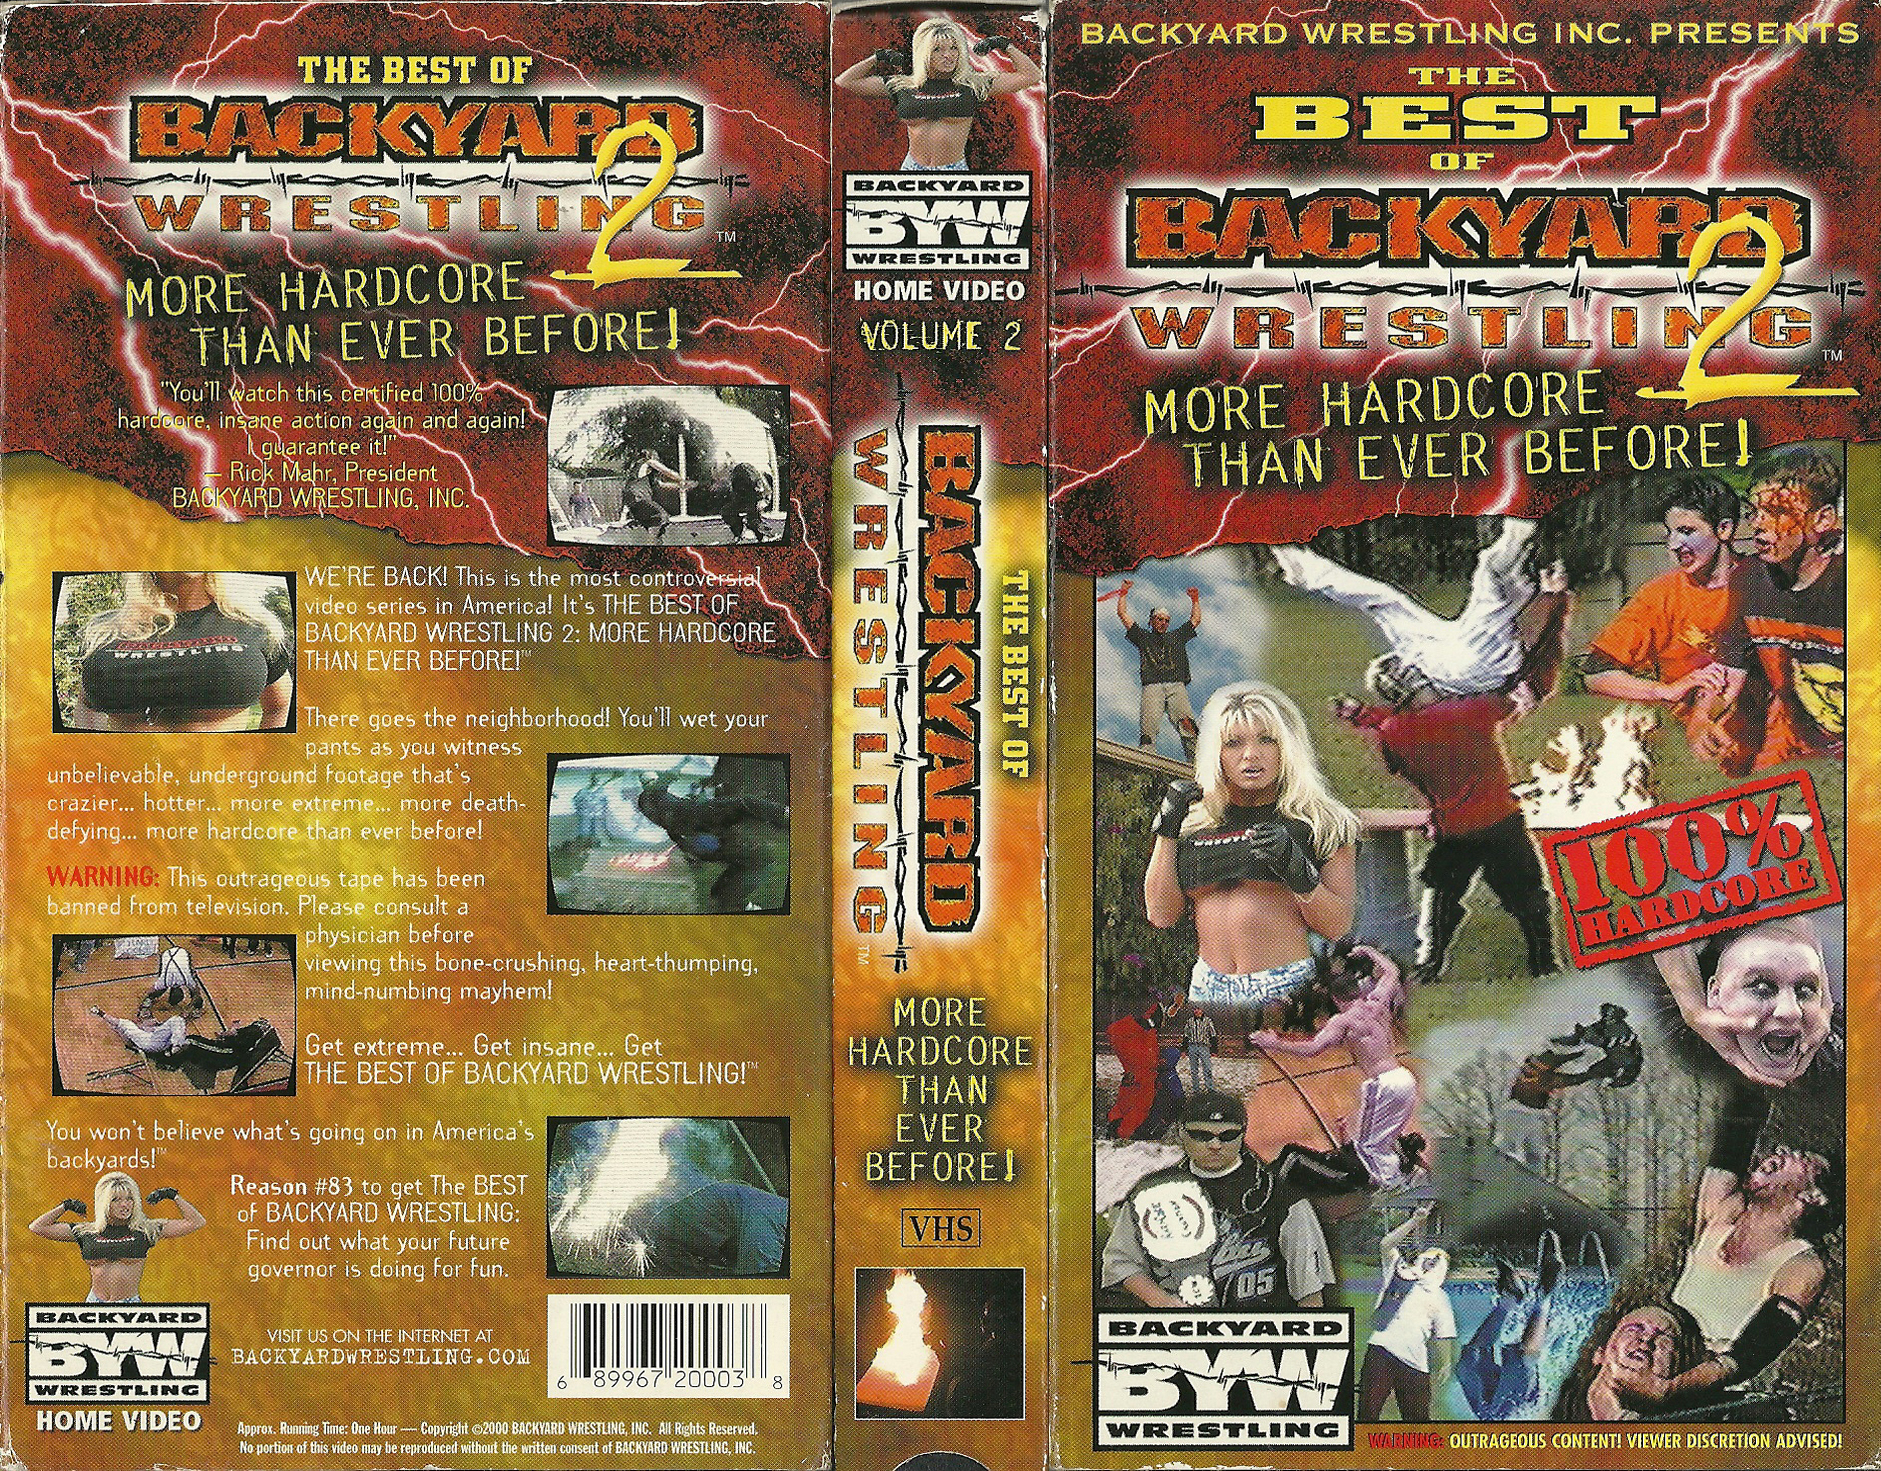 THE BEST OF BACKYARD WRESTLING 2: More Hardcore Than Ever Before! movie